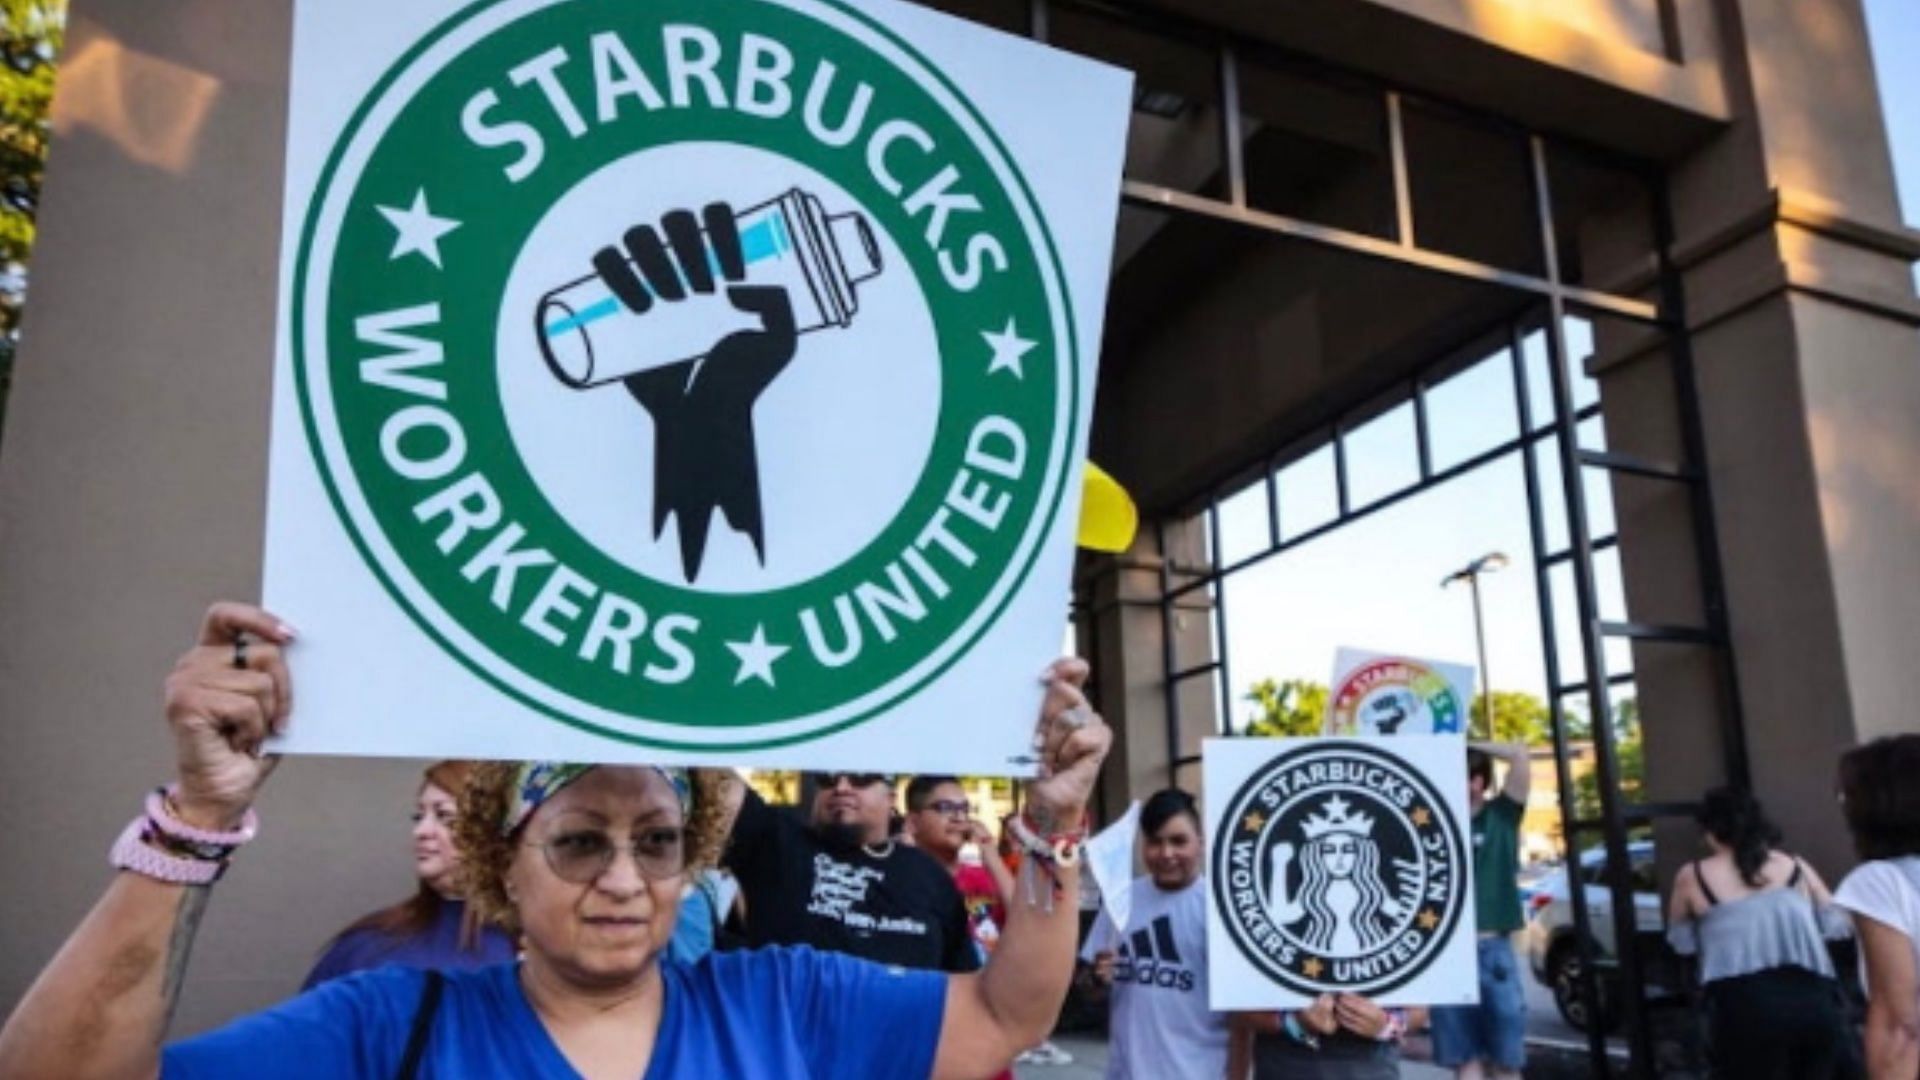 Starbucks Workers United is showing support for Hamas. (Image via X/GioBruno1600)